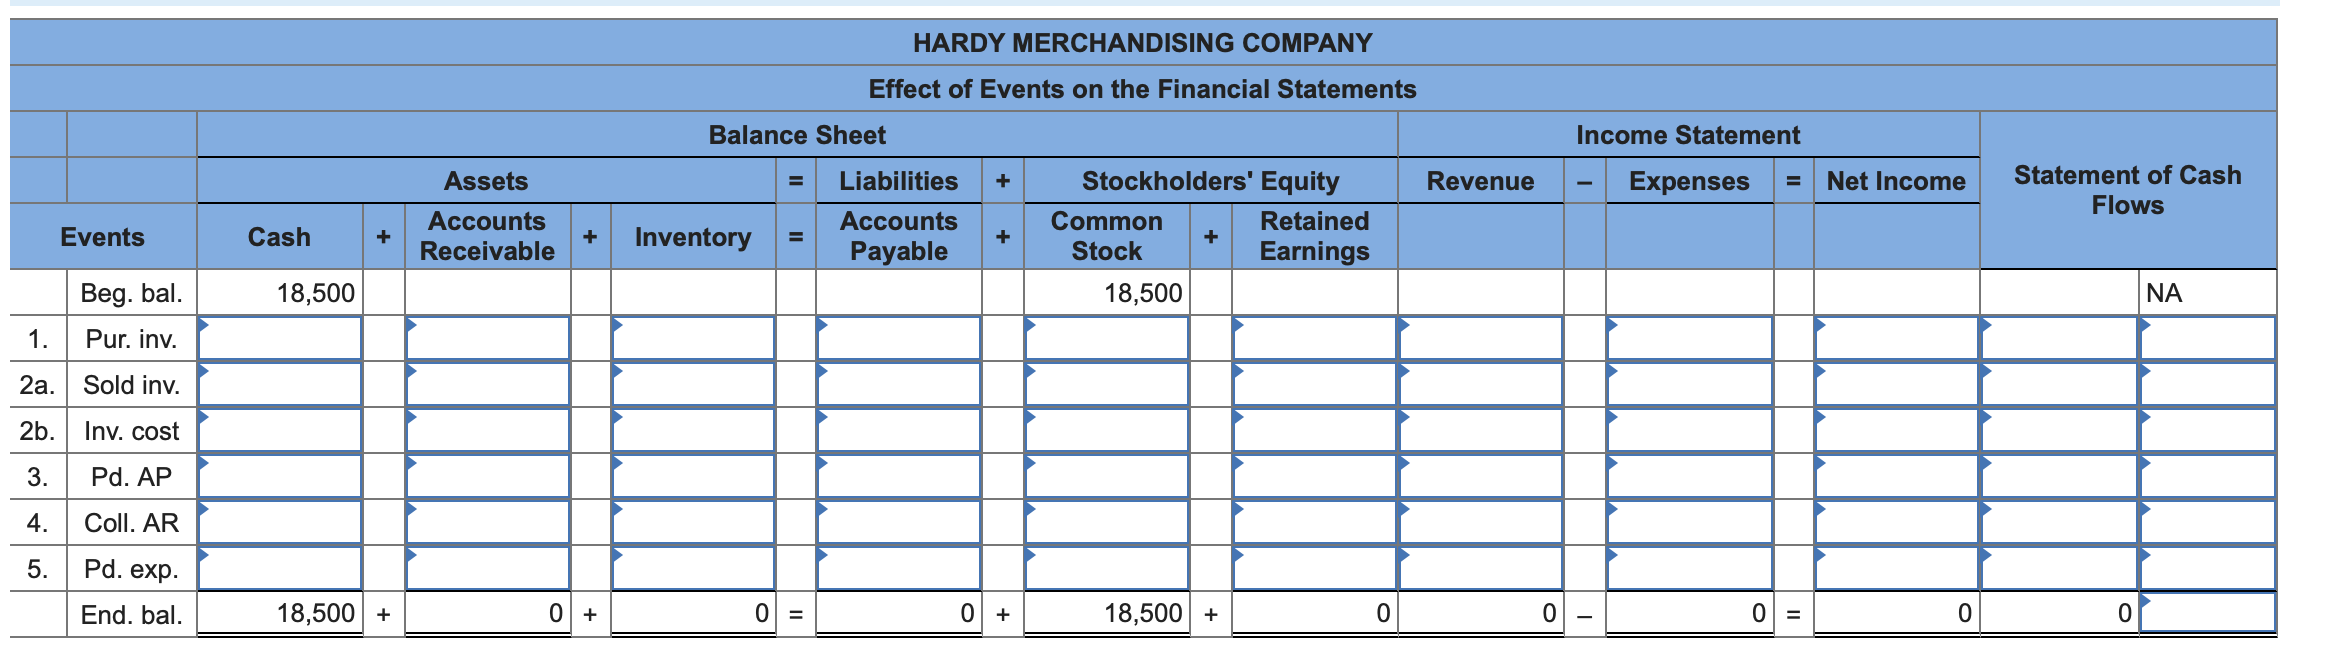 Solved During Year 1, Hardy Merchandising Company purchased | Chegg.com